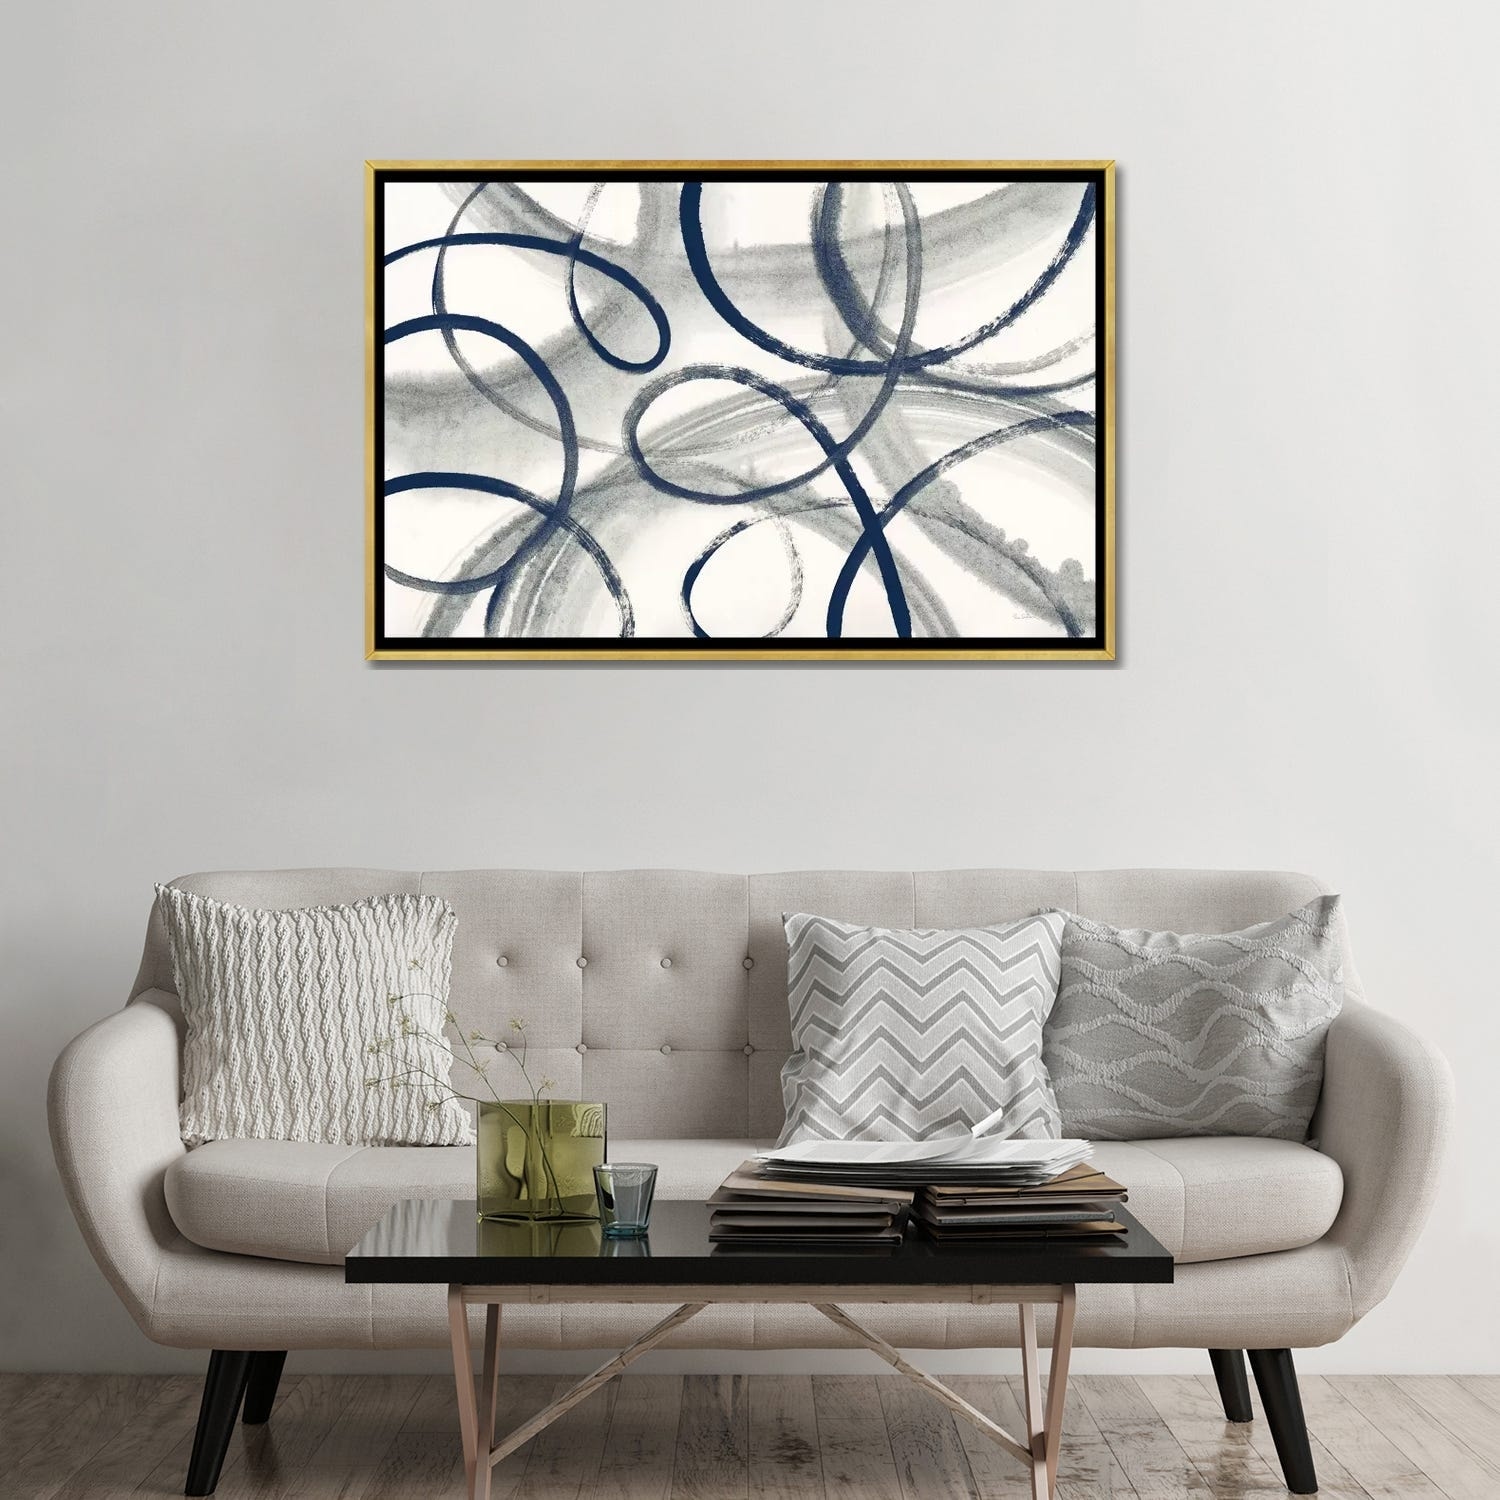 iCanvas "Calligraphia With Navy" by Sue Schlabach Framed Canvas Print